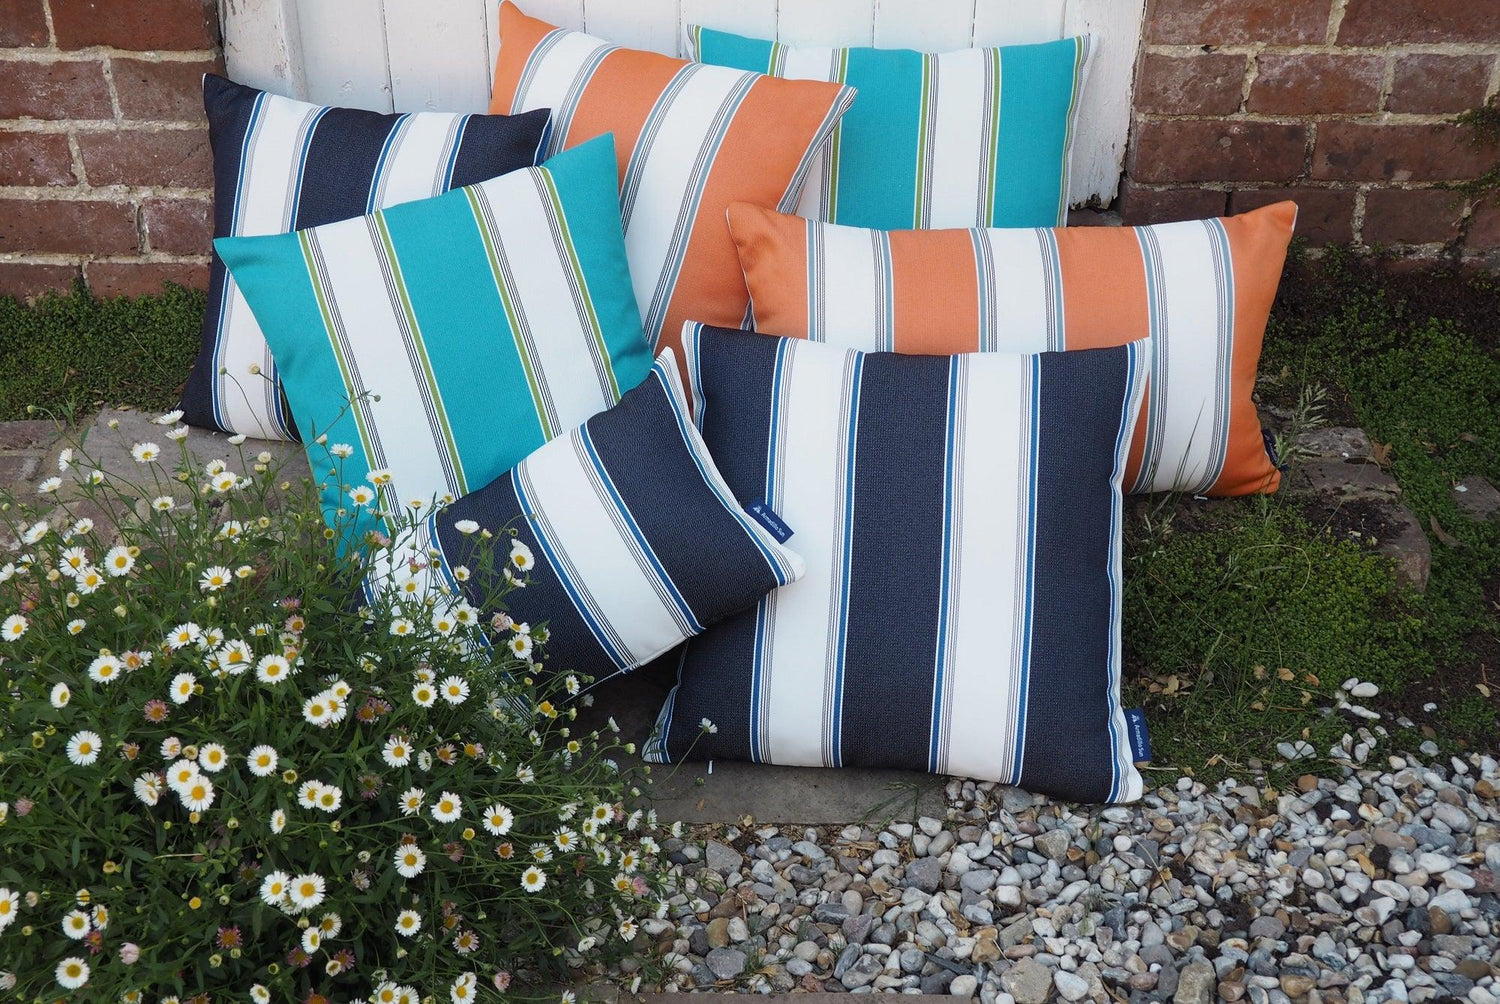 Outdoor cushions in a pile on a garden patio. They are striped in navy and white, turquoise and wite, and orange and white.